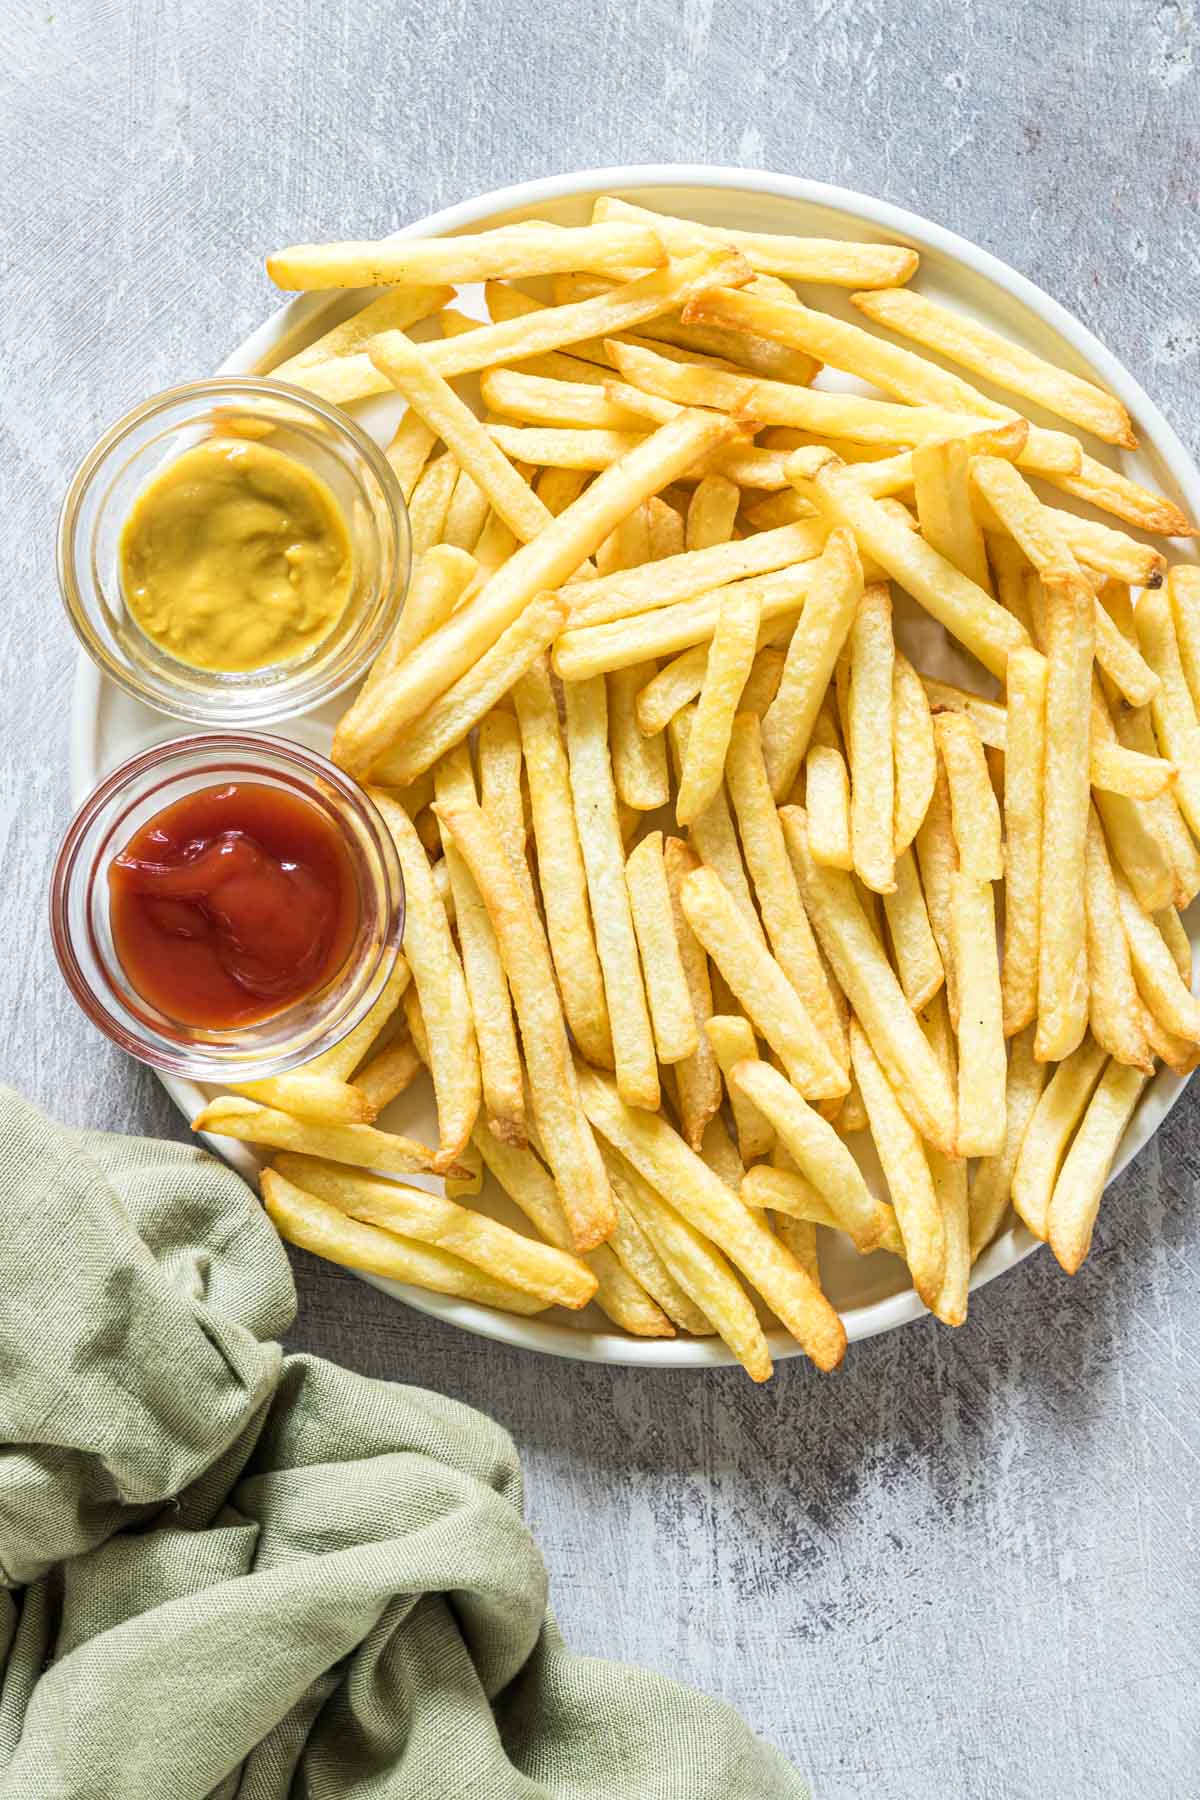 HOW TO REHEAT FRIES IN AIR FRYER